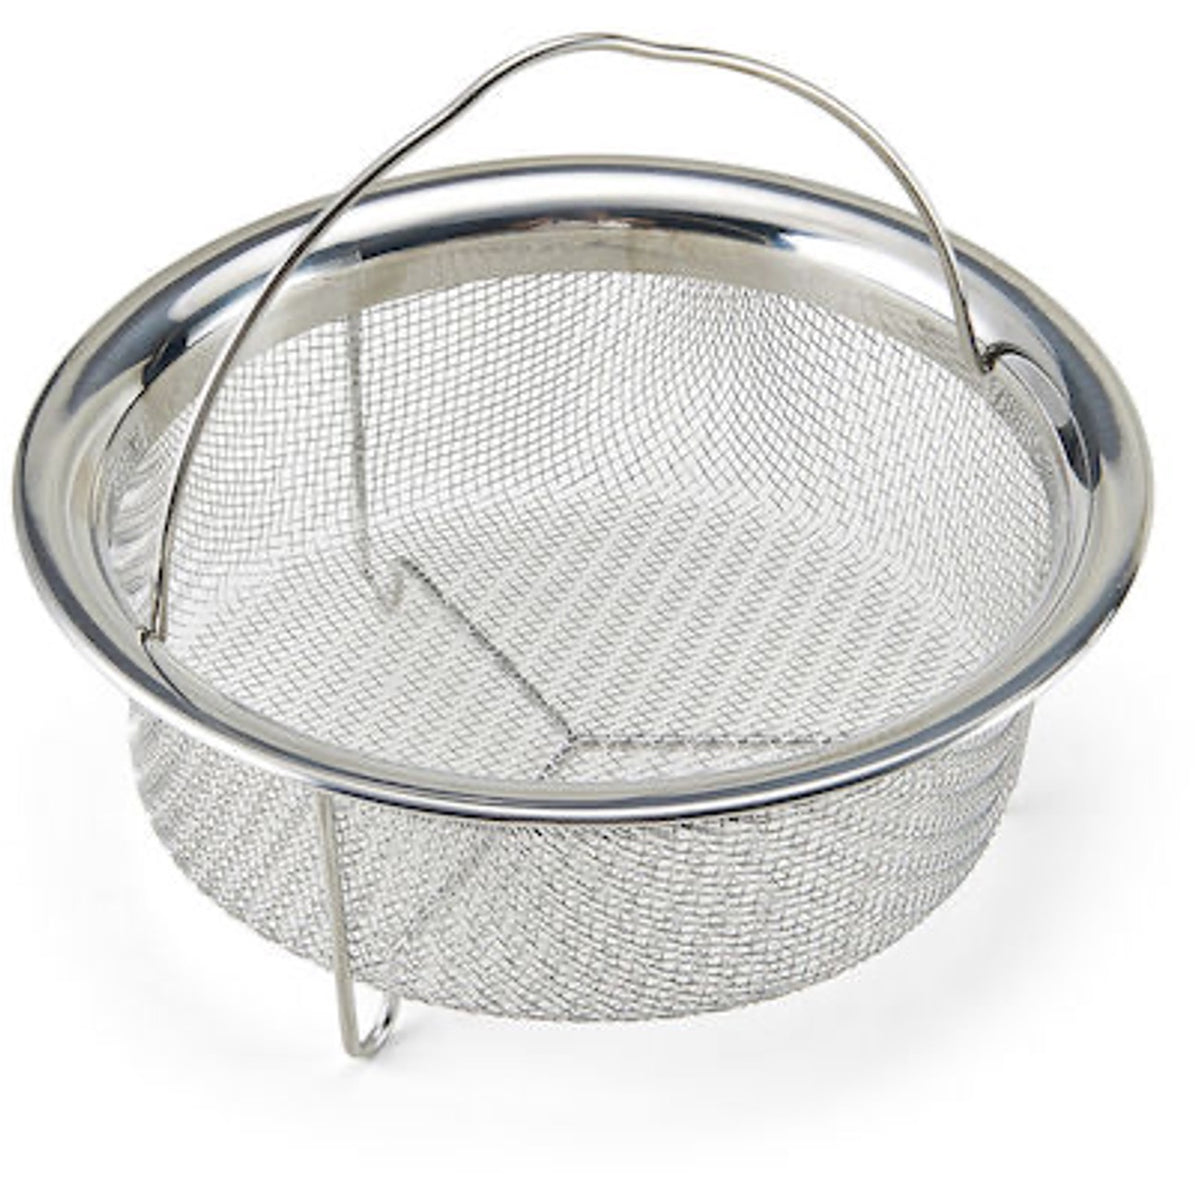 Geek Daily Deals Mar. 28, 2019: Steamer Basket for Your Instant Pot Cooker  Just $10 Today! - GeekDad